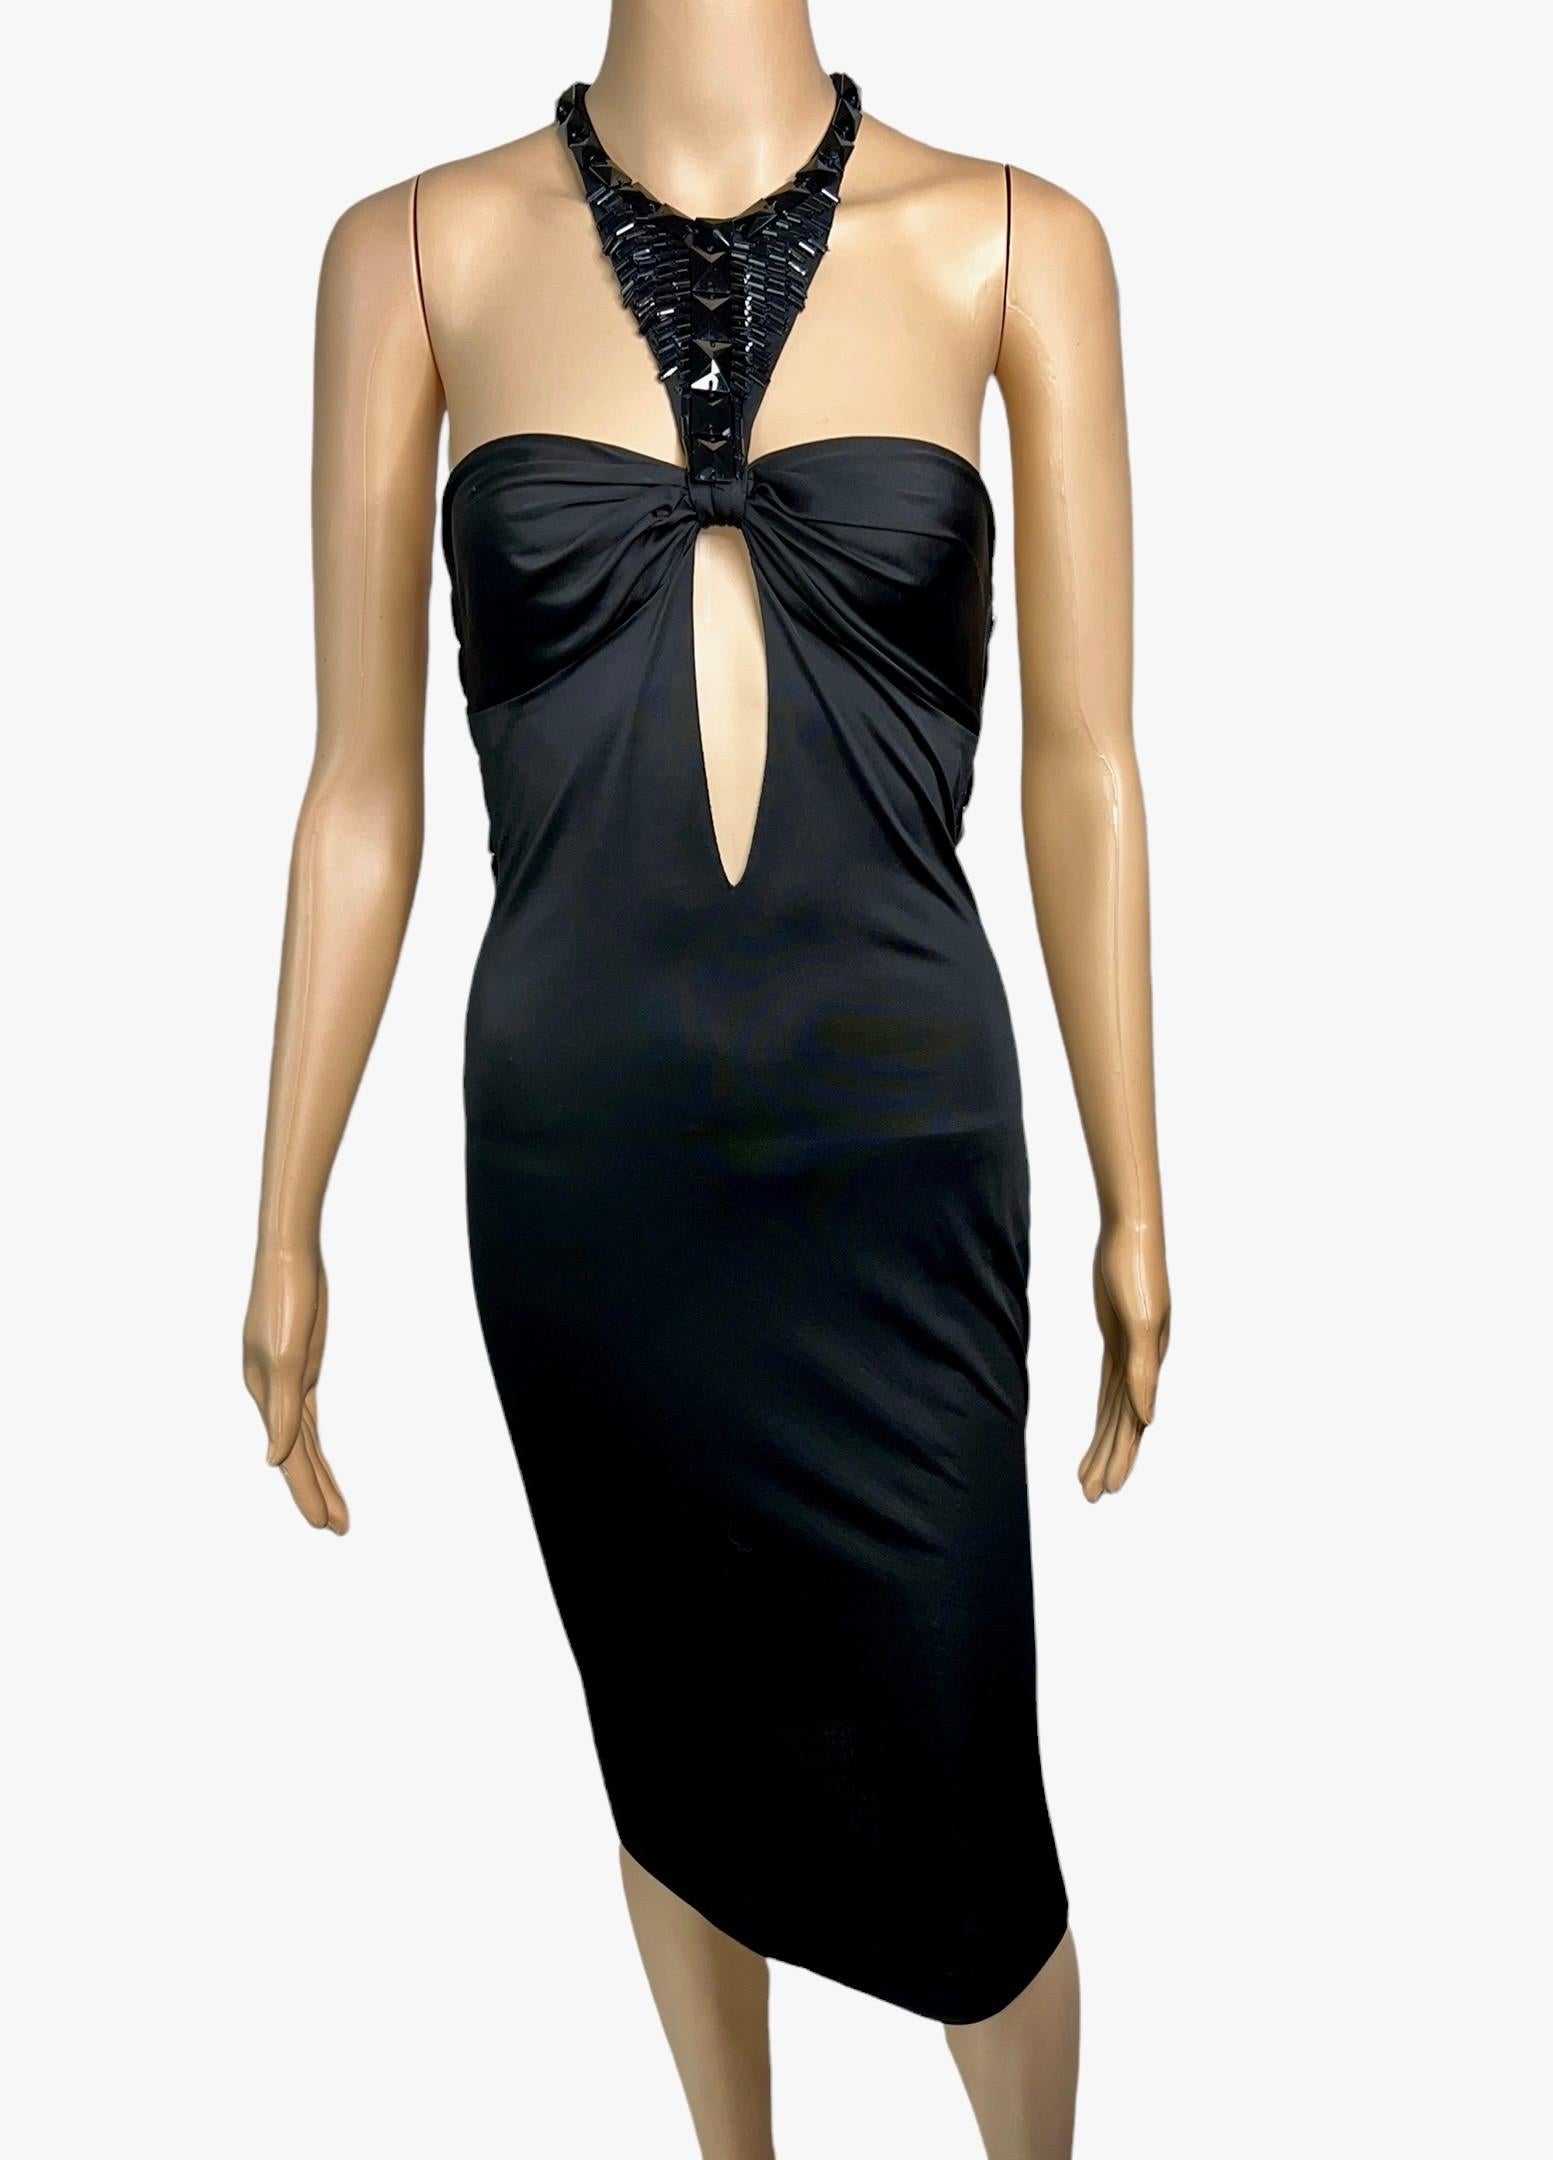 Tom Ford for Gucci F/W 2004 Embellished Plunging Cutout Black Evening Dress  In Excellent Condition For Sale In Naples, FL